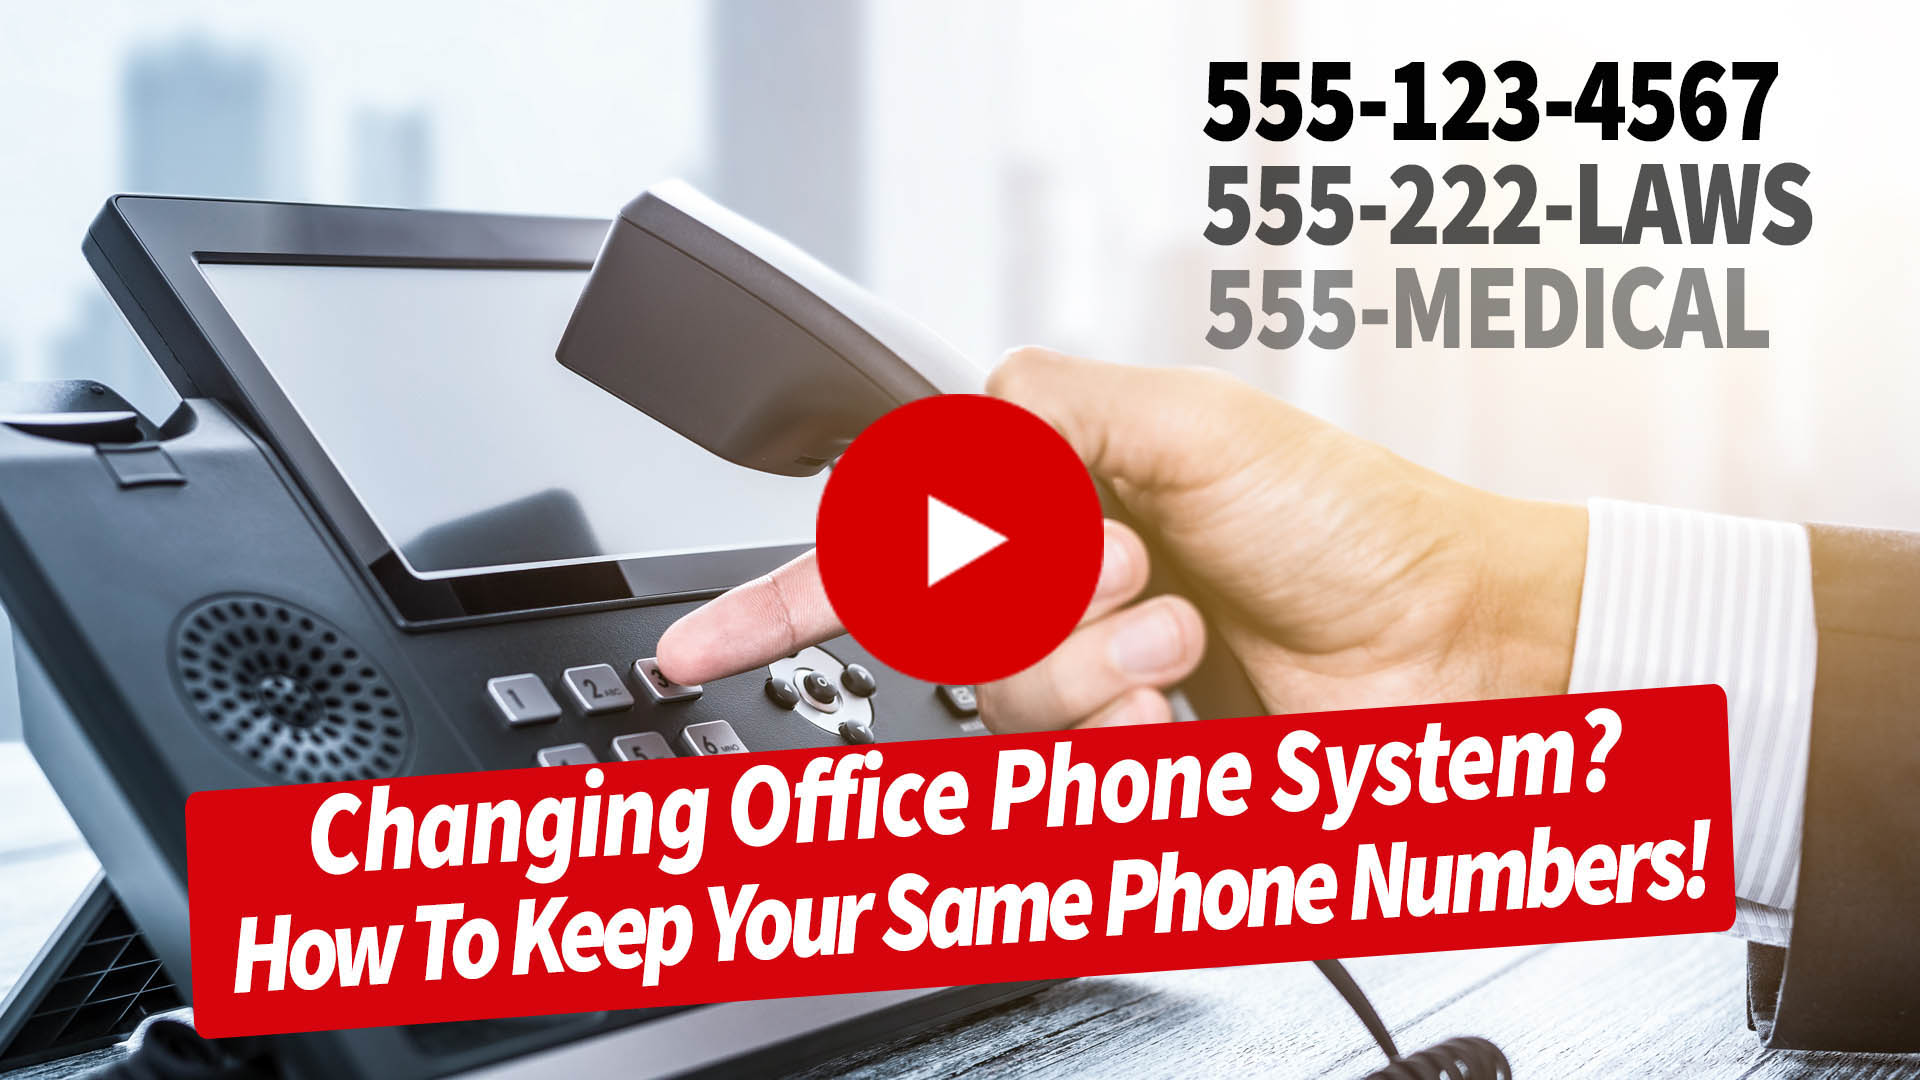 Changing Business Phone Systems, Can I Keep My Phone Number?